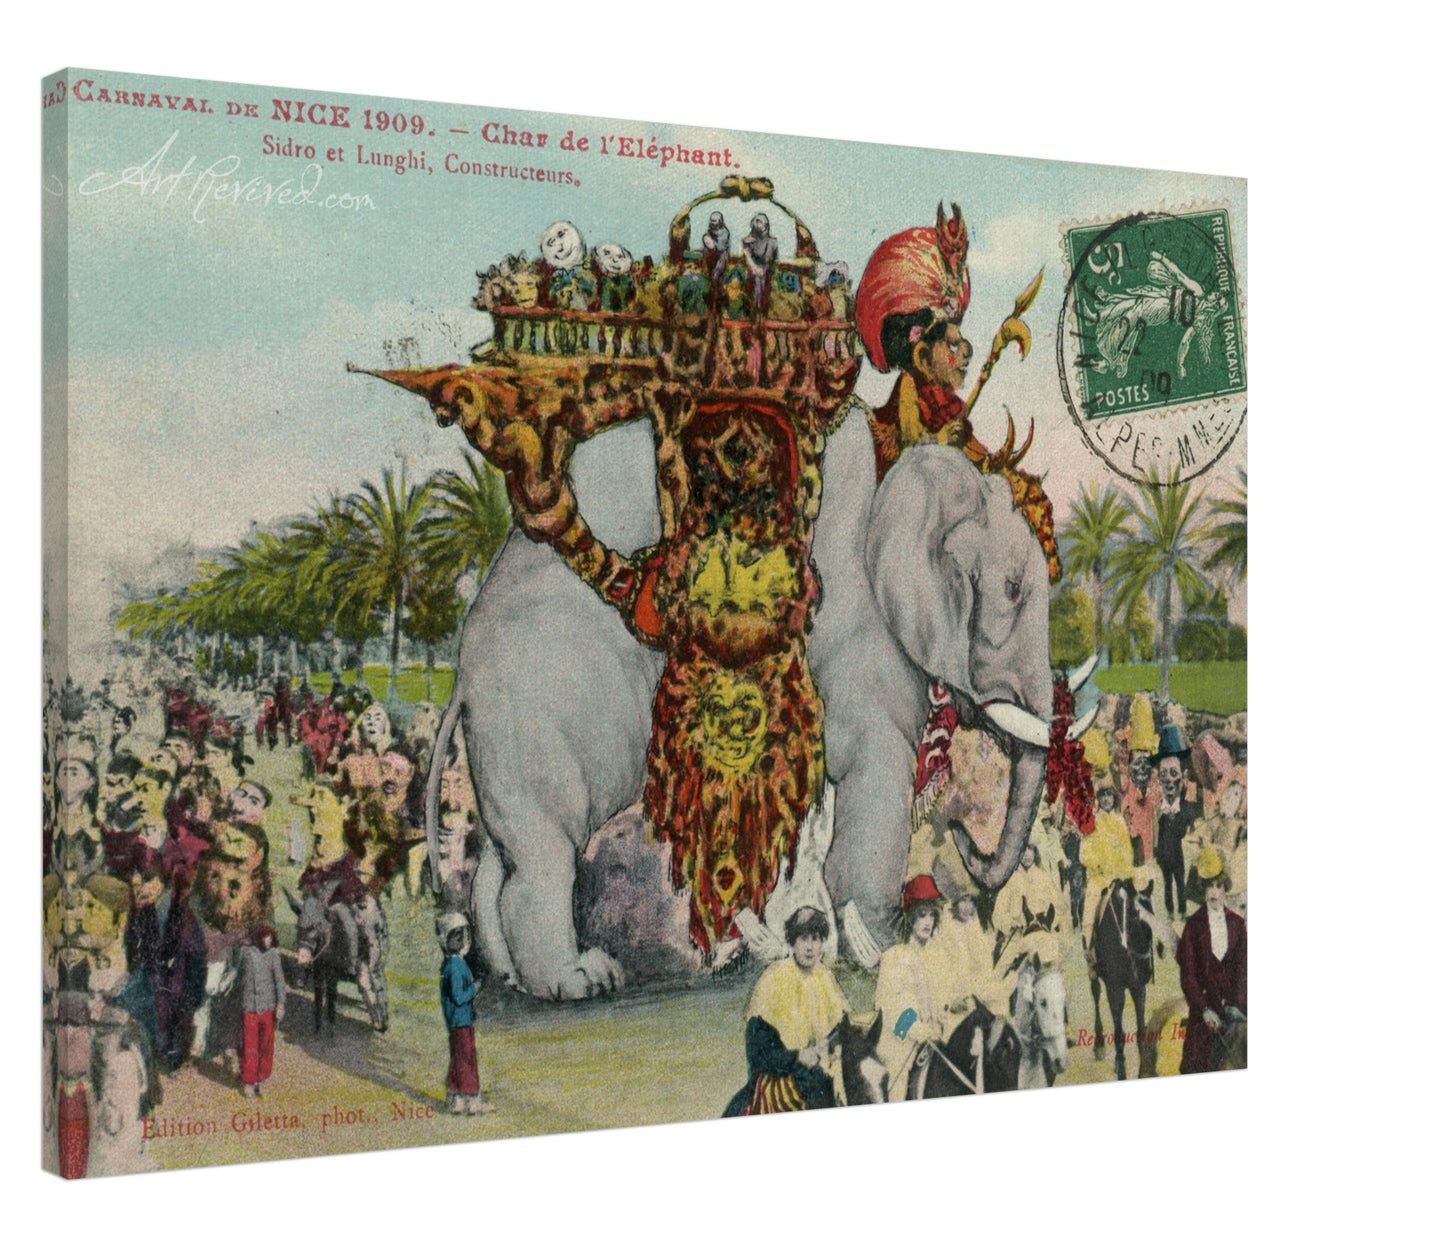 Chariot of the elephant